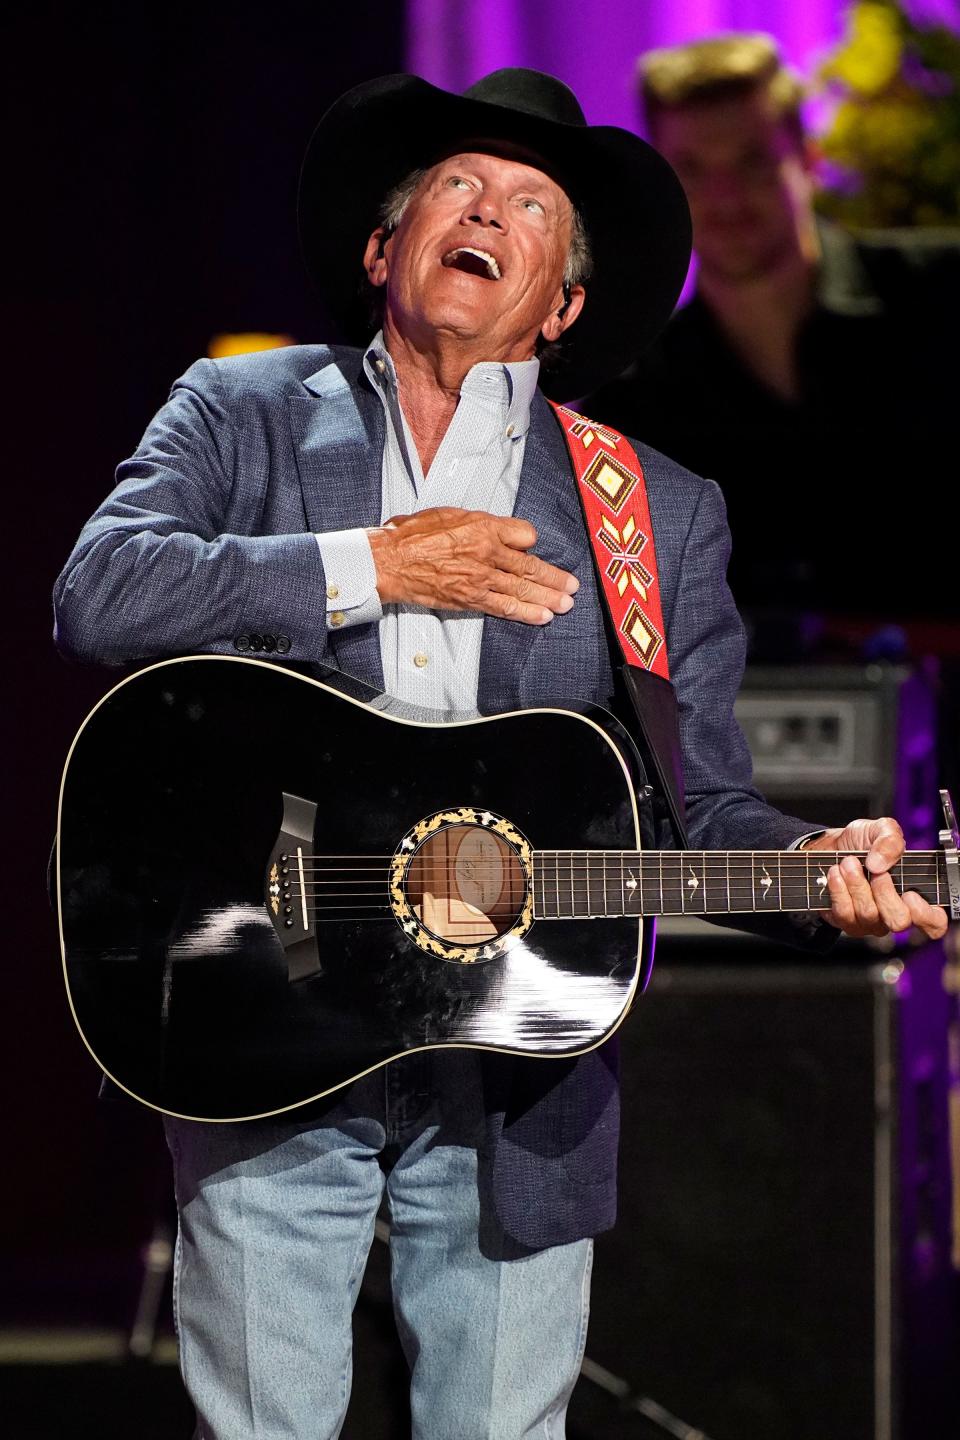 Even at 70, George Strait has not slowed. Even his last album, 2019’s “Honky Tonk Time Machine,” is record-breaking: With his single "Weight of the Badge," Strait became the first artist to have 100 songs on Billboard's Country Airplay chart.